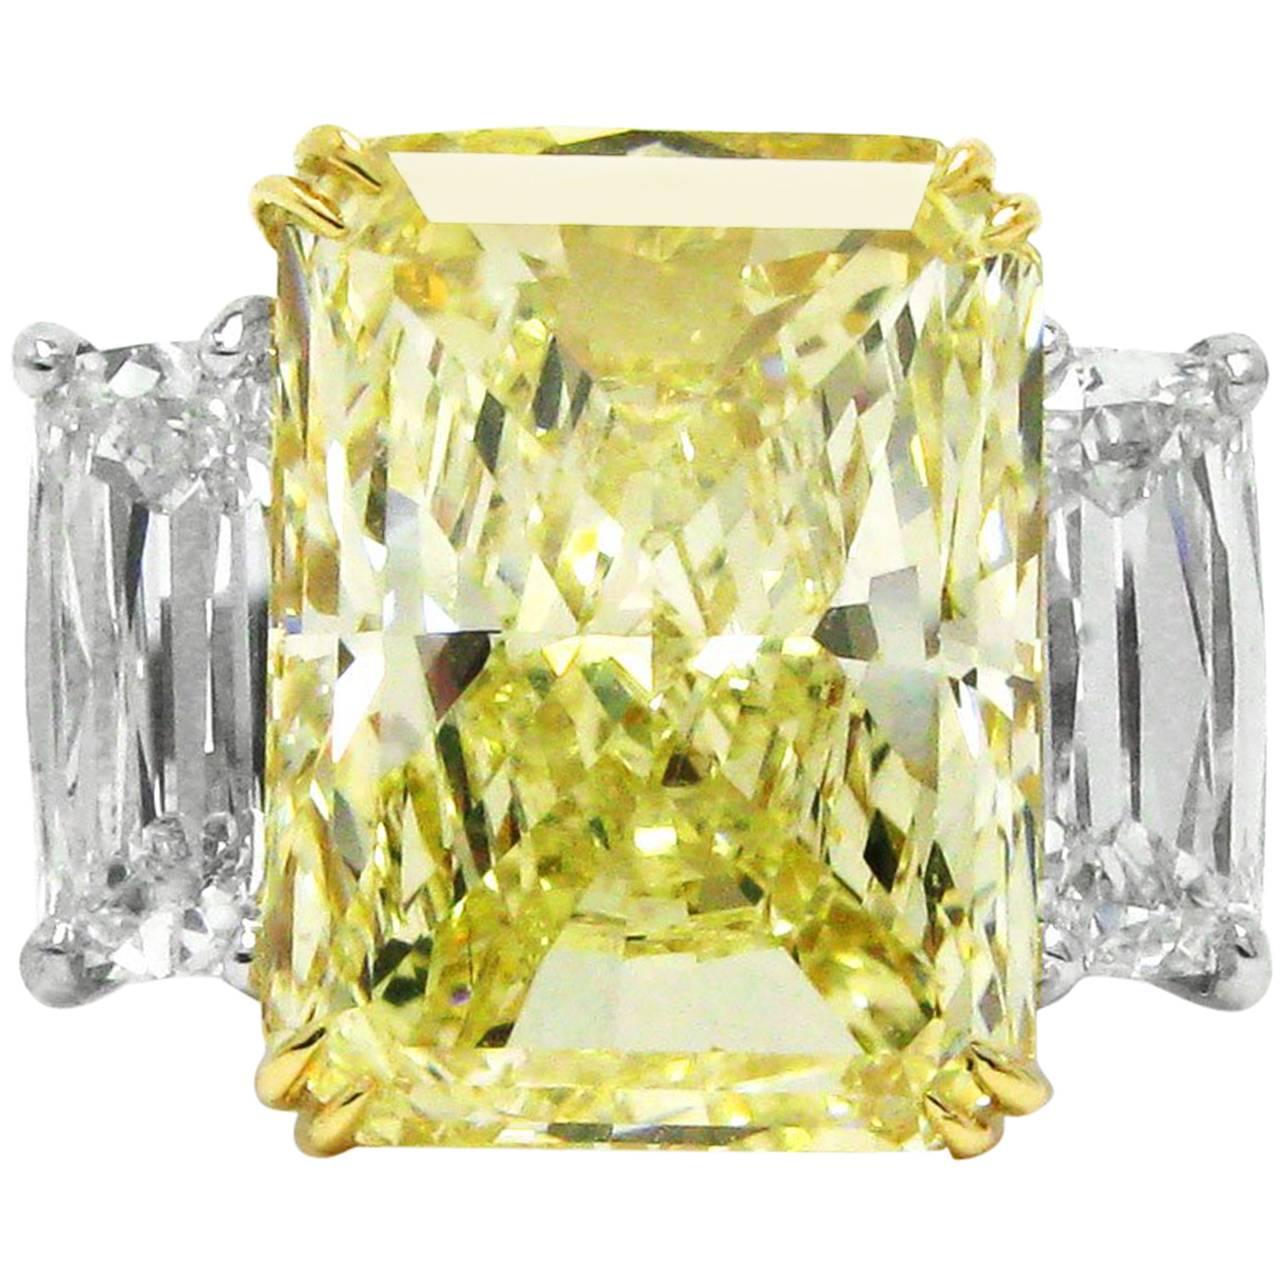 J. Birnbach 11.98 Carats Total Fancy GIA Yellow and White Diamonds Gold Ring 